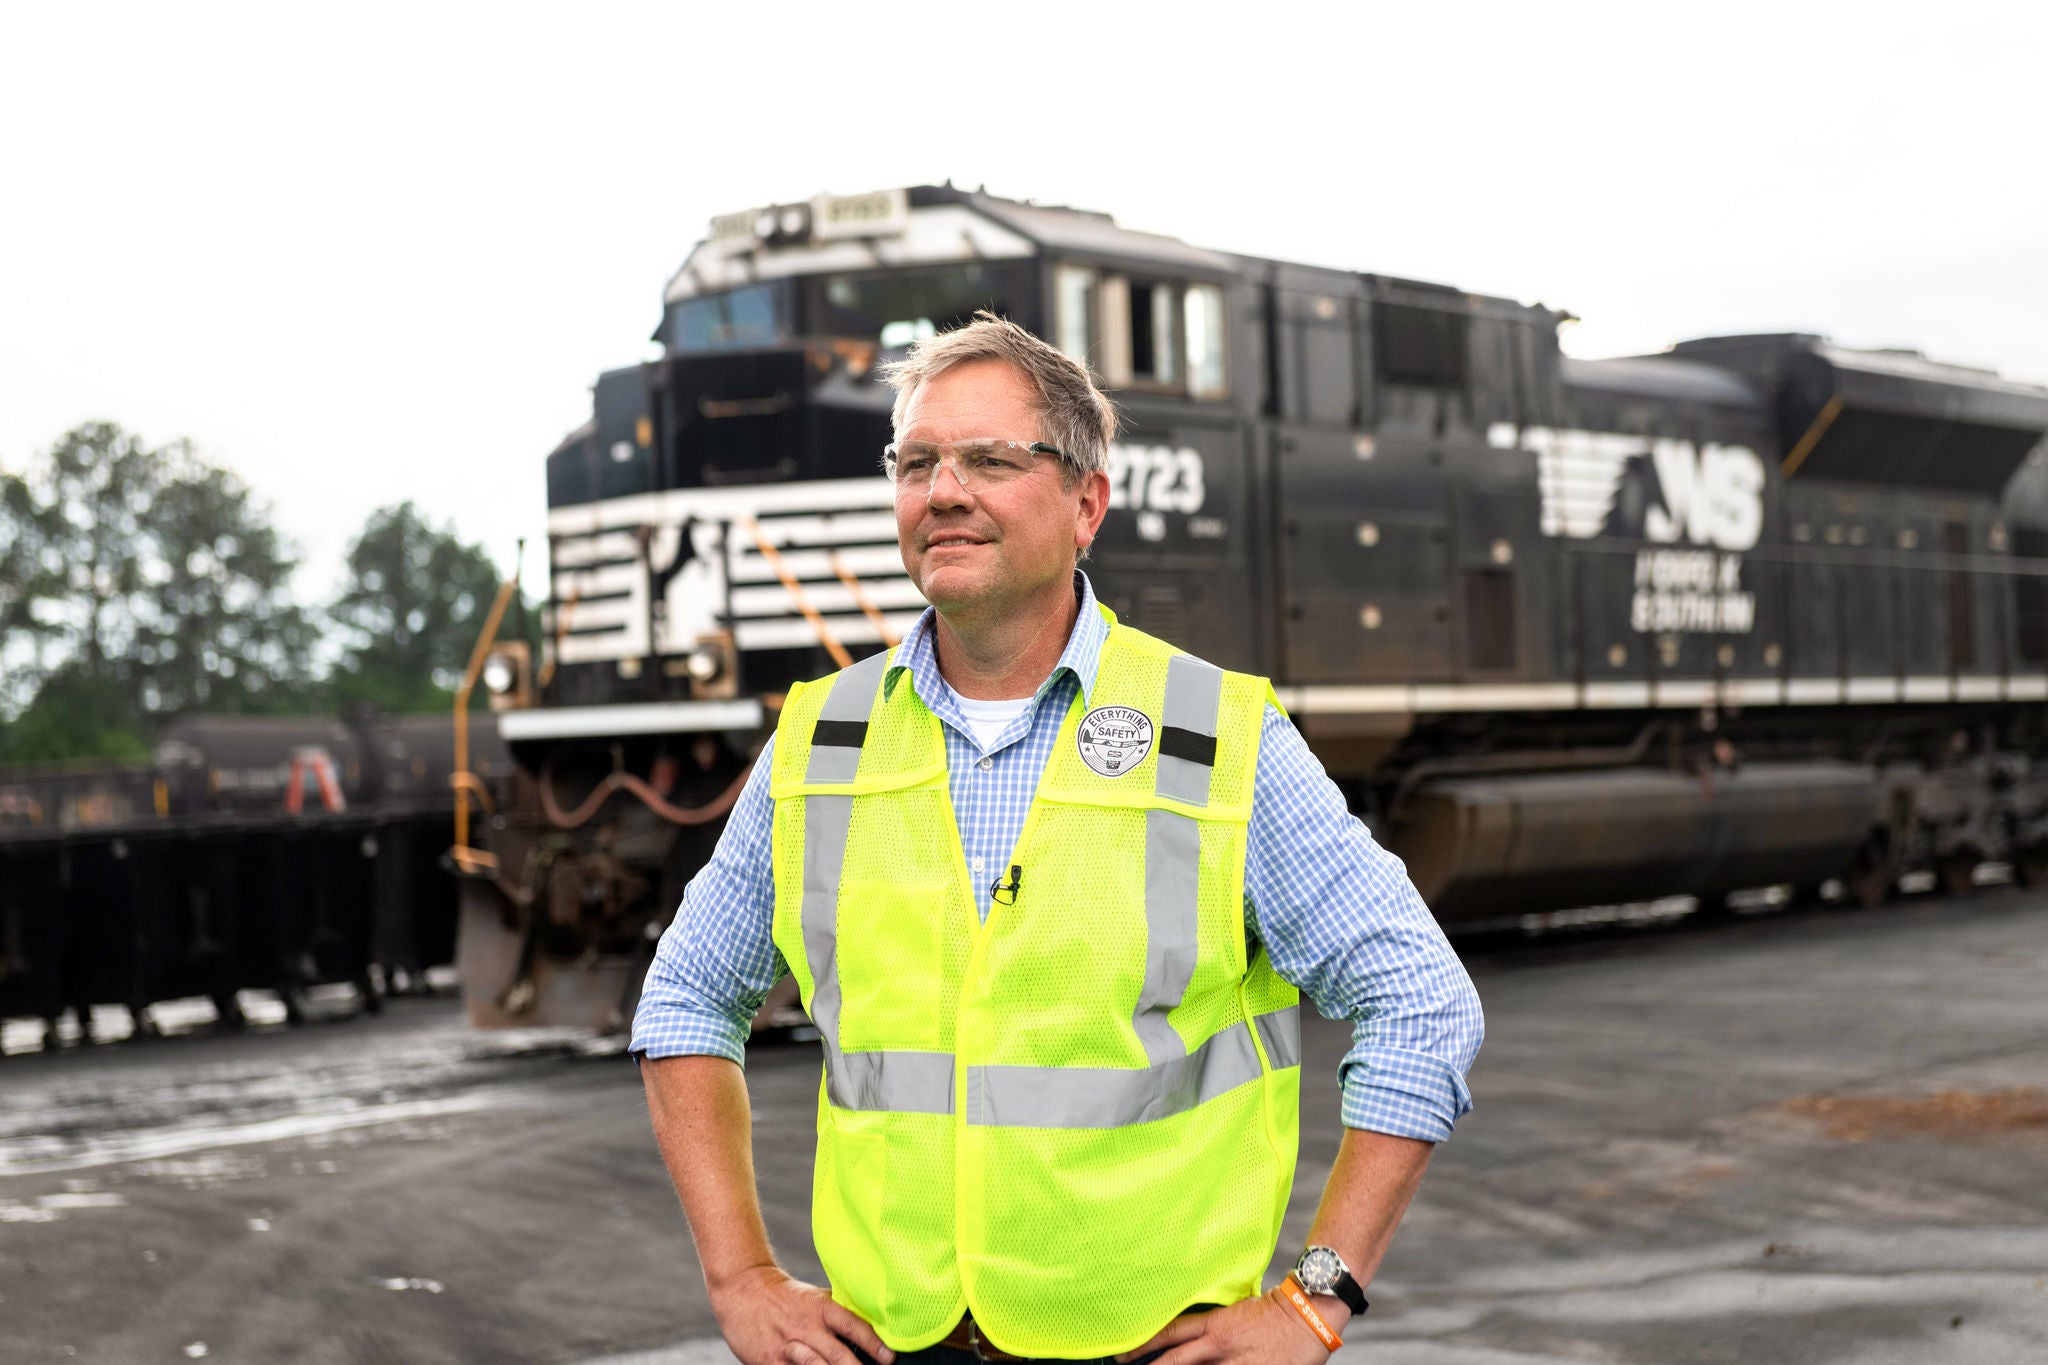 Railroad Industry leader Norfolk Southern’s president Alan Shaw standing in front of a train